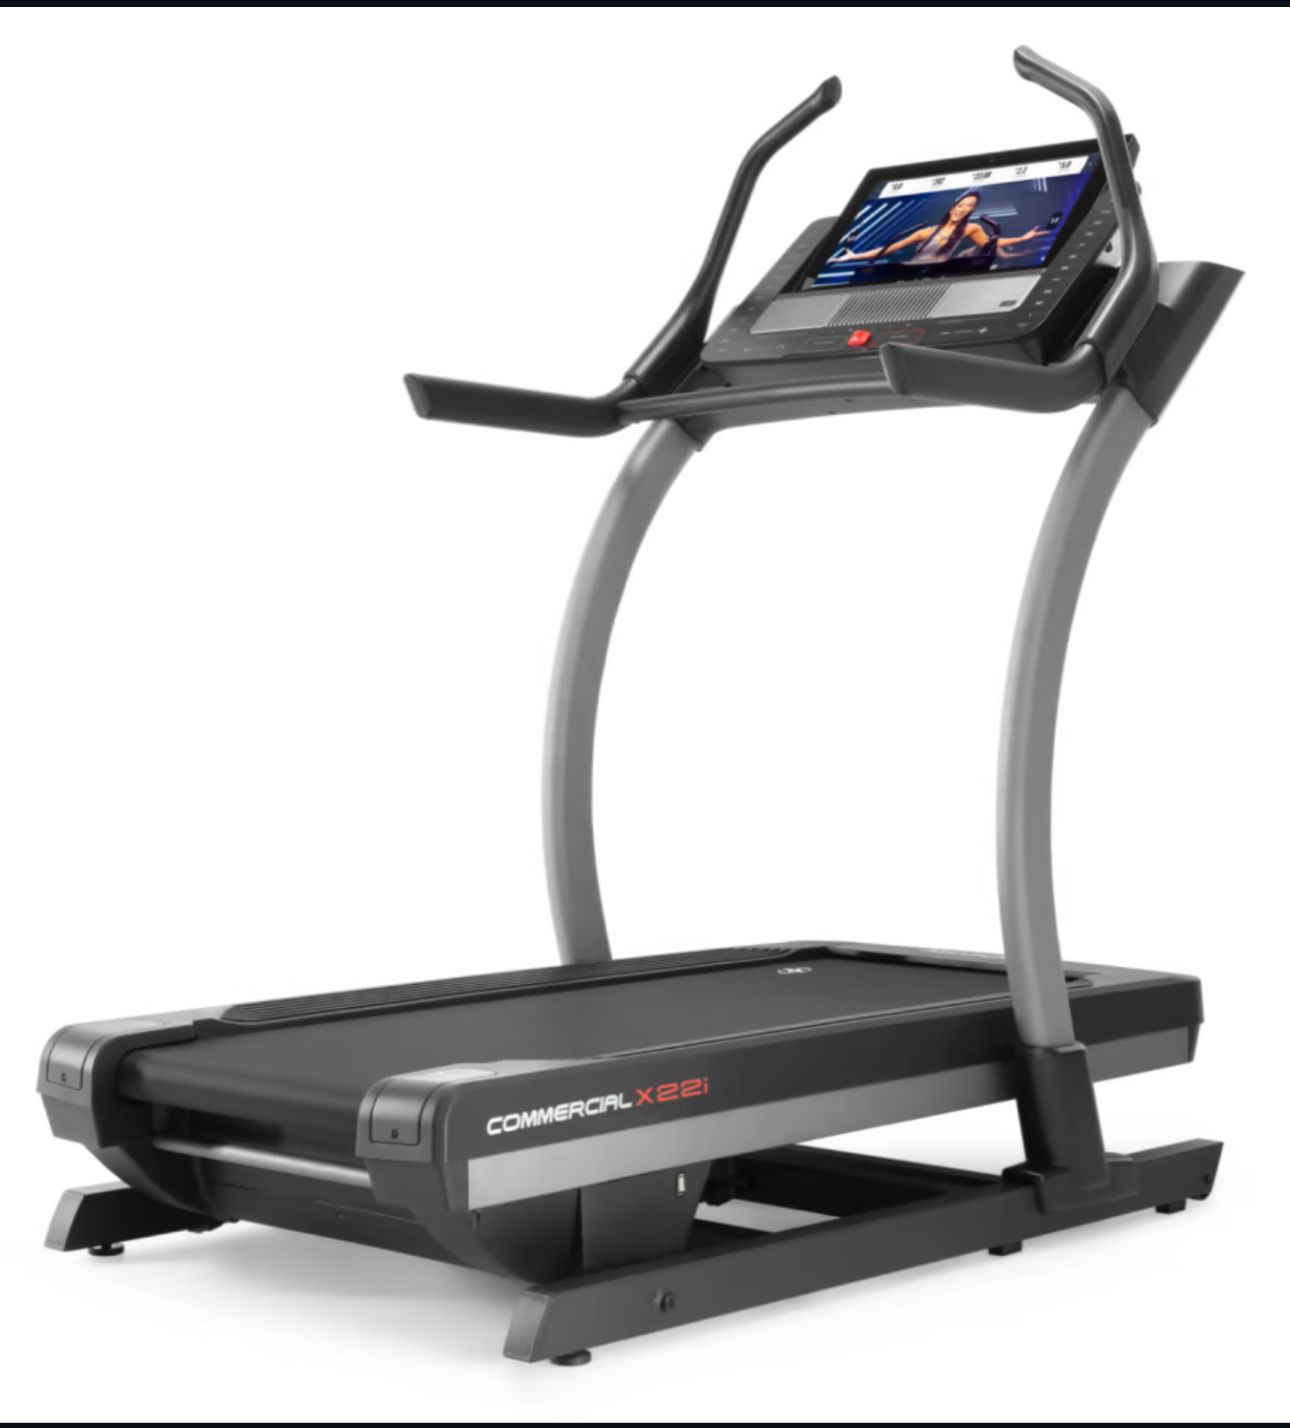 NordicTrack Commercial X22i